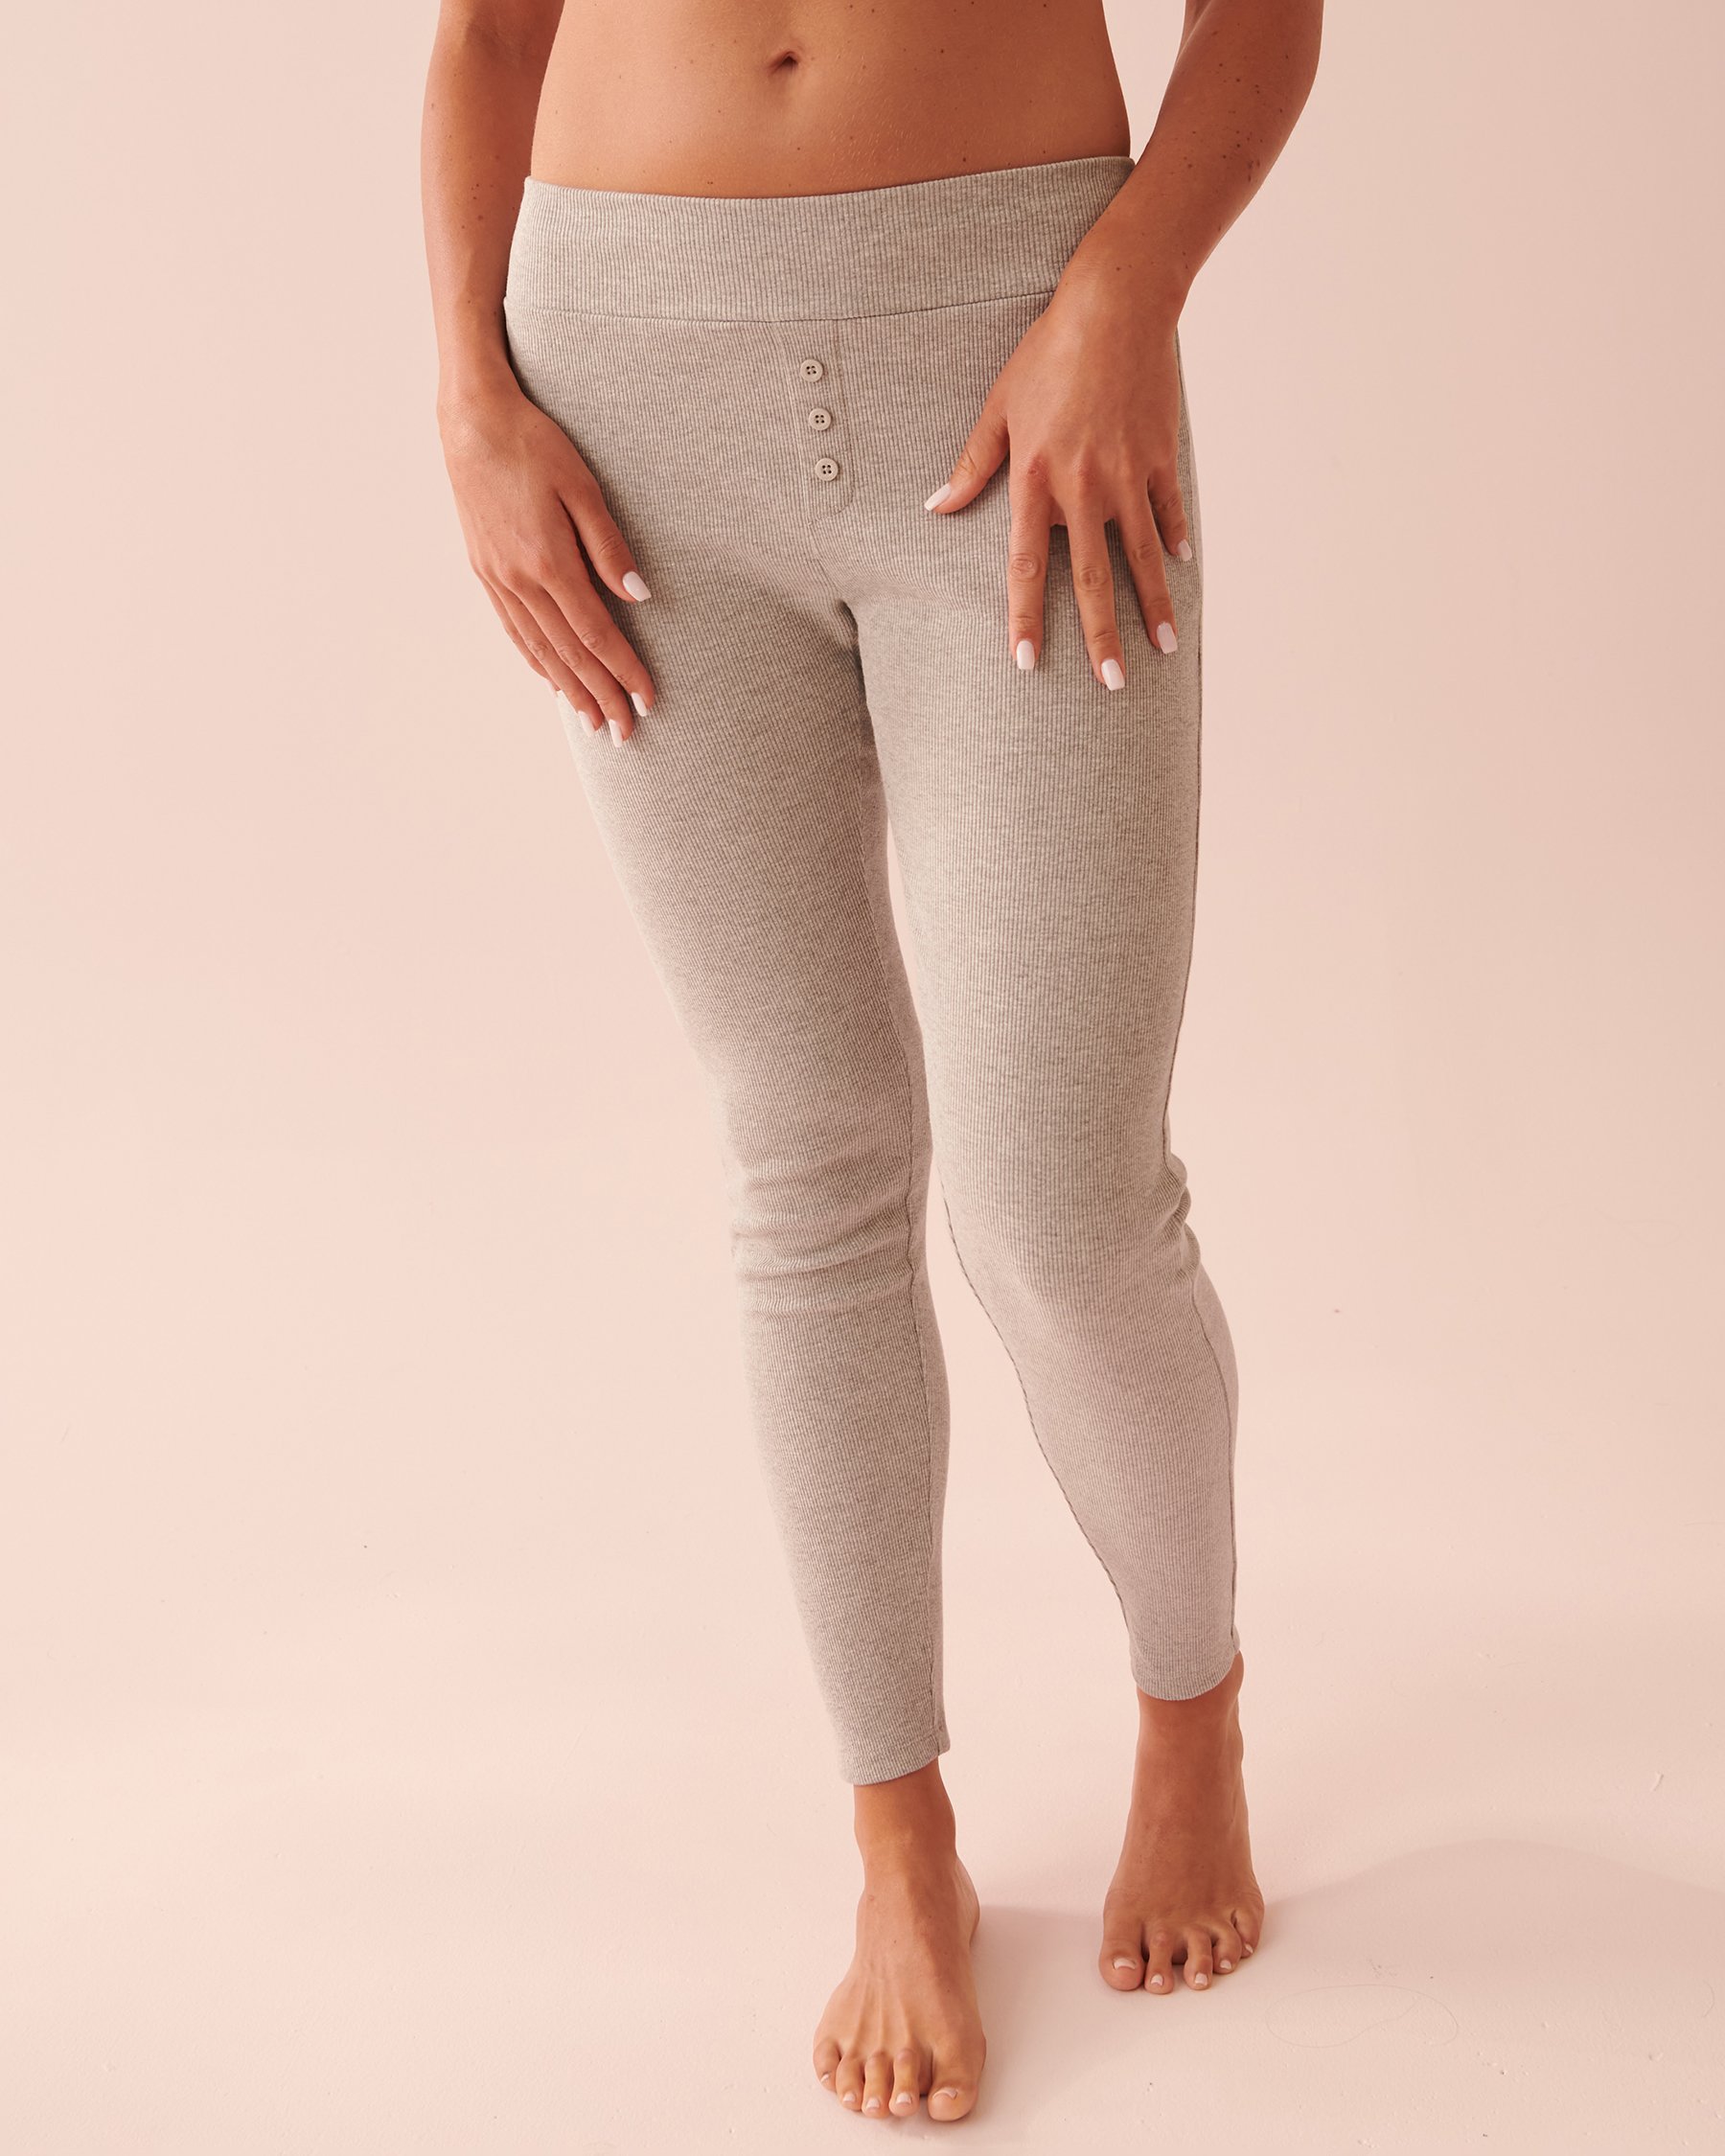 Ribbed Fitted Pants - Dusty grey